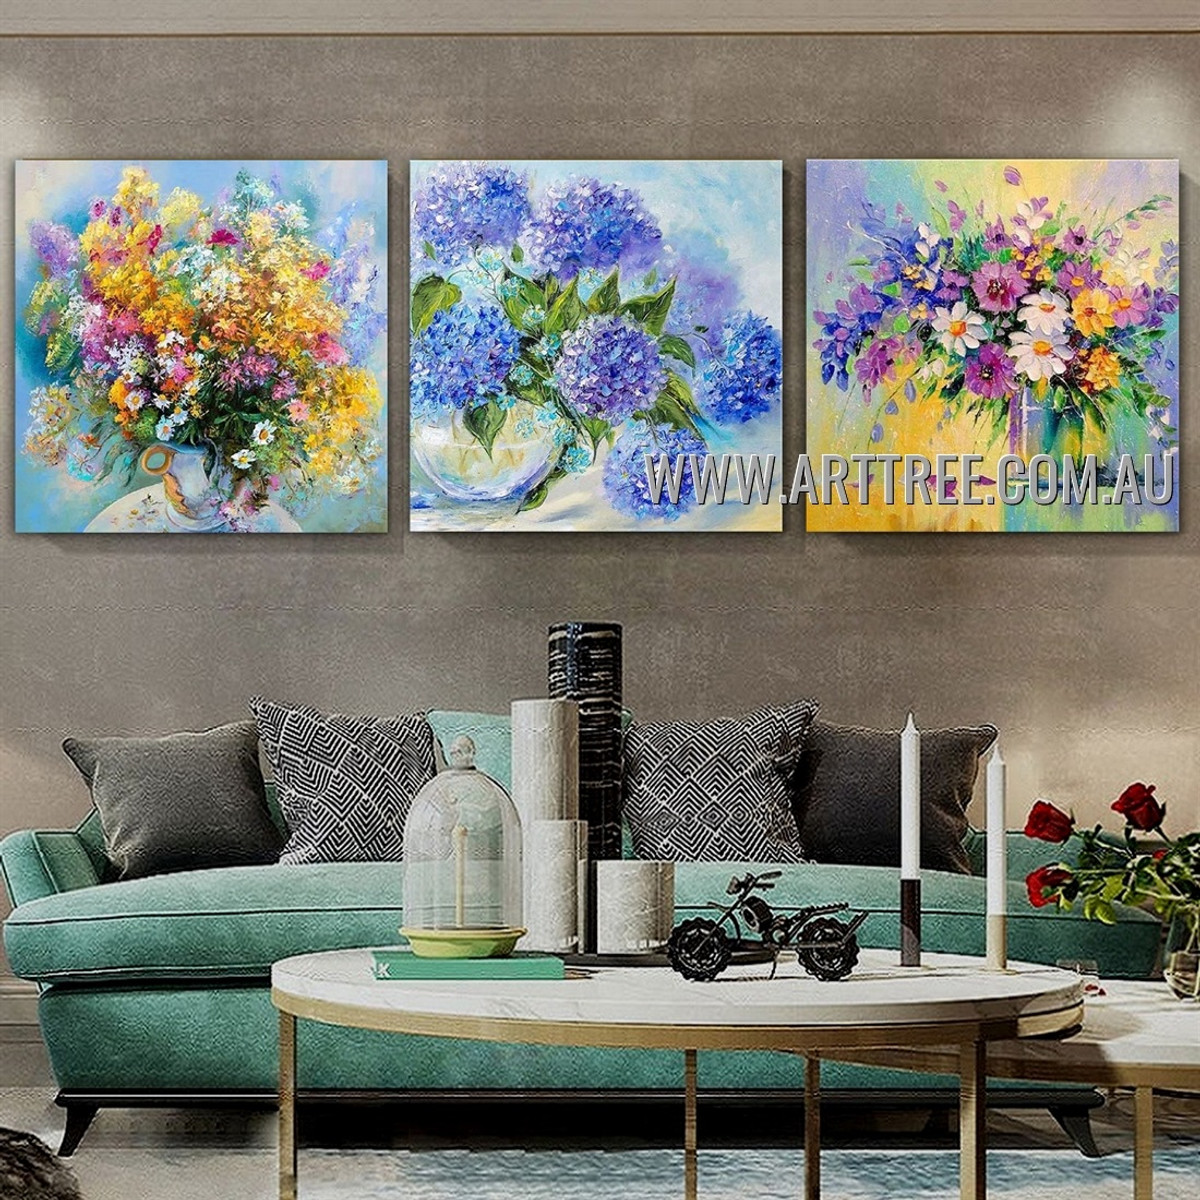 Colorific Floweret Floral Modern Heavy Texture Artist Handmade 3 Piece Multi Panel Canvas Painting Wall Art Set For Room Ornament